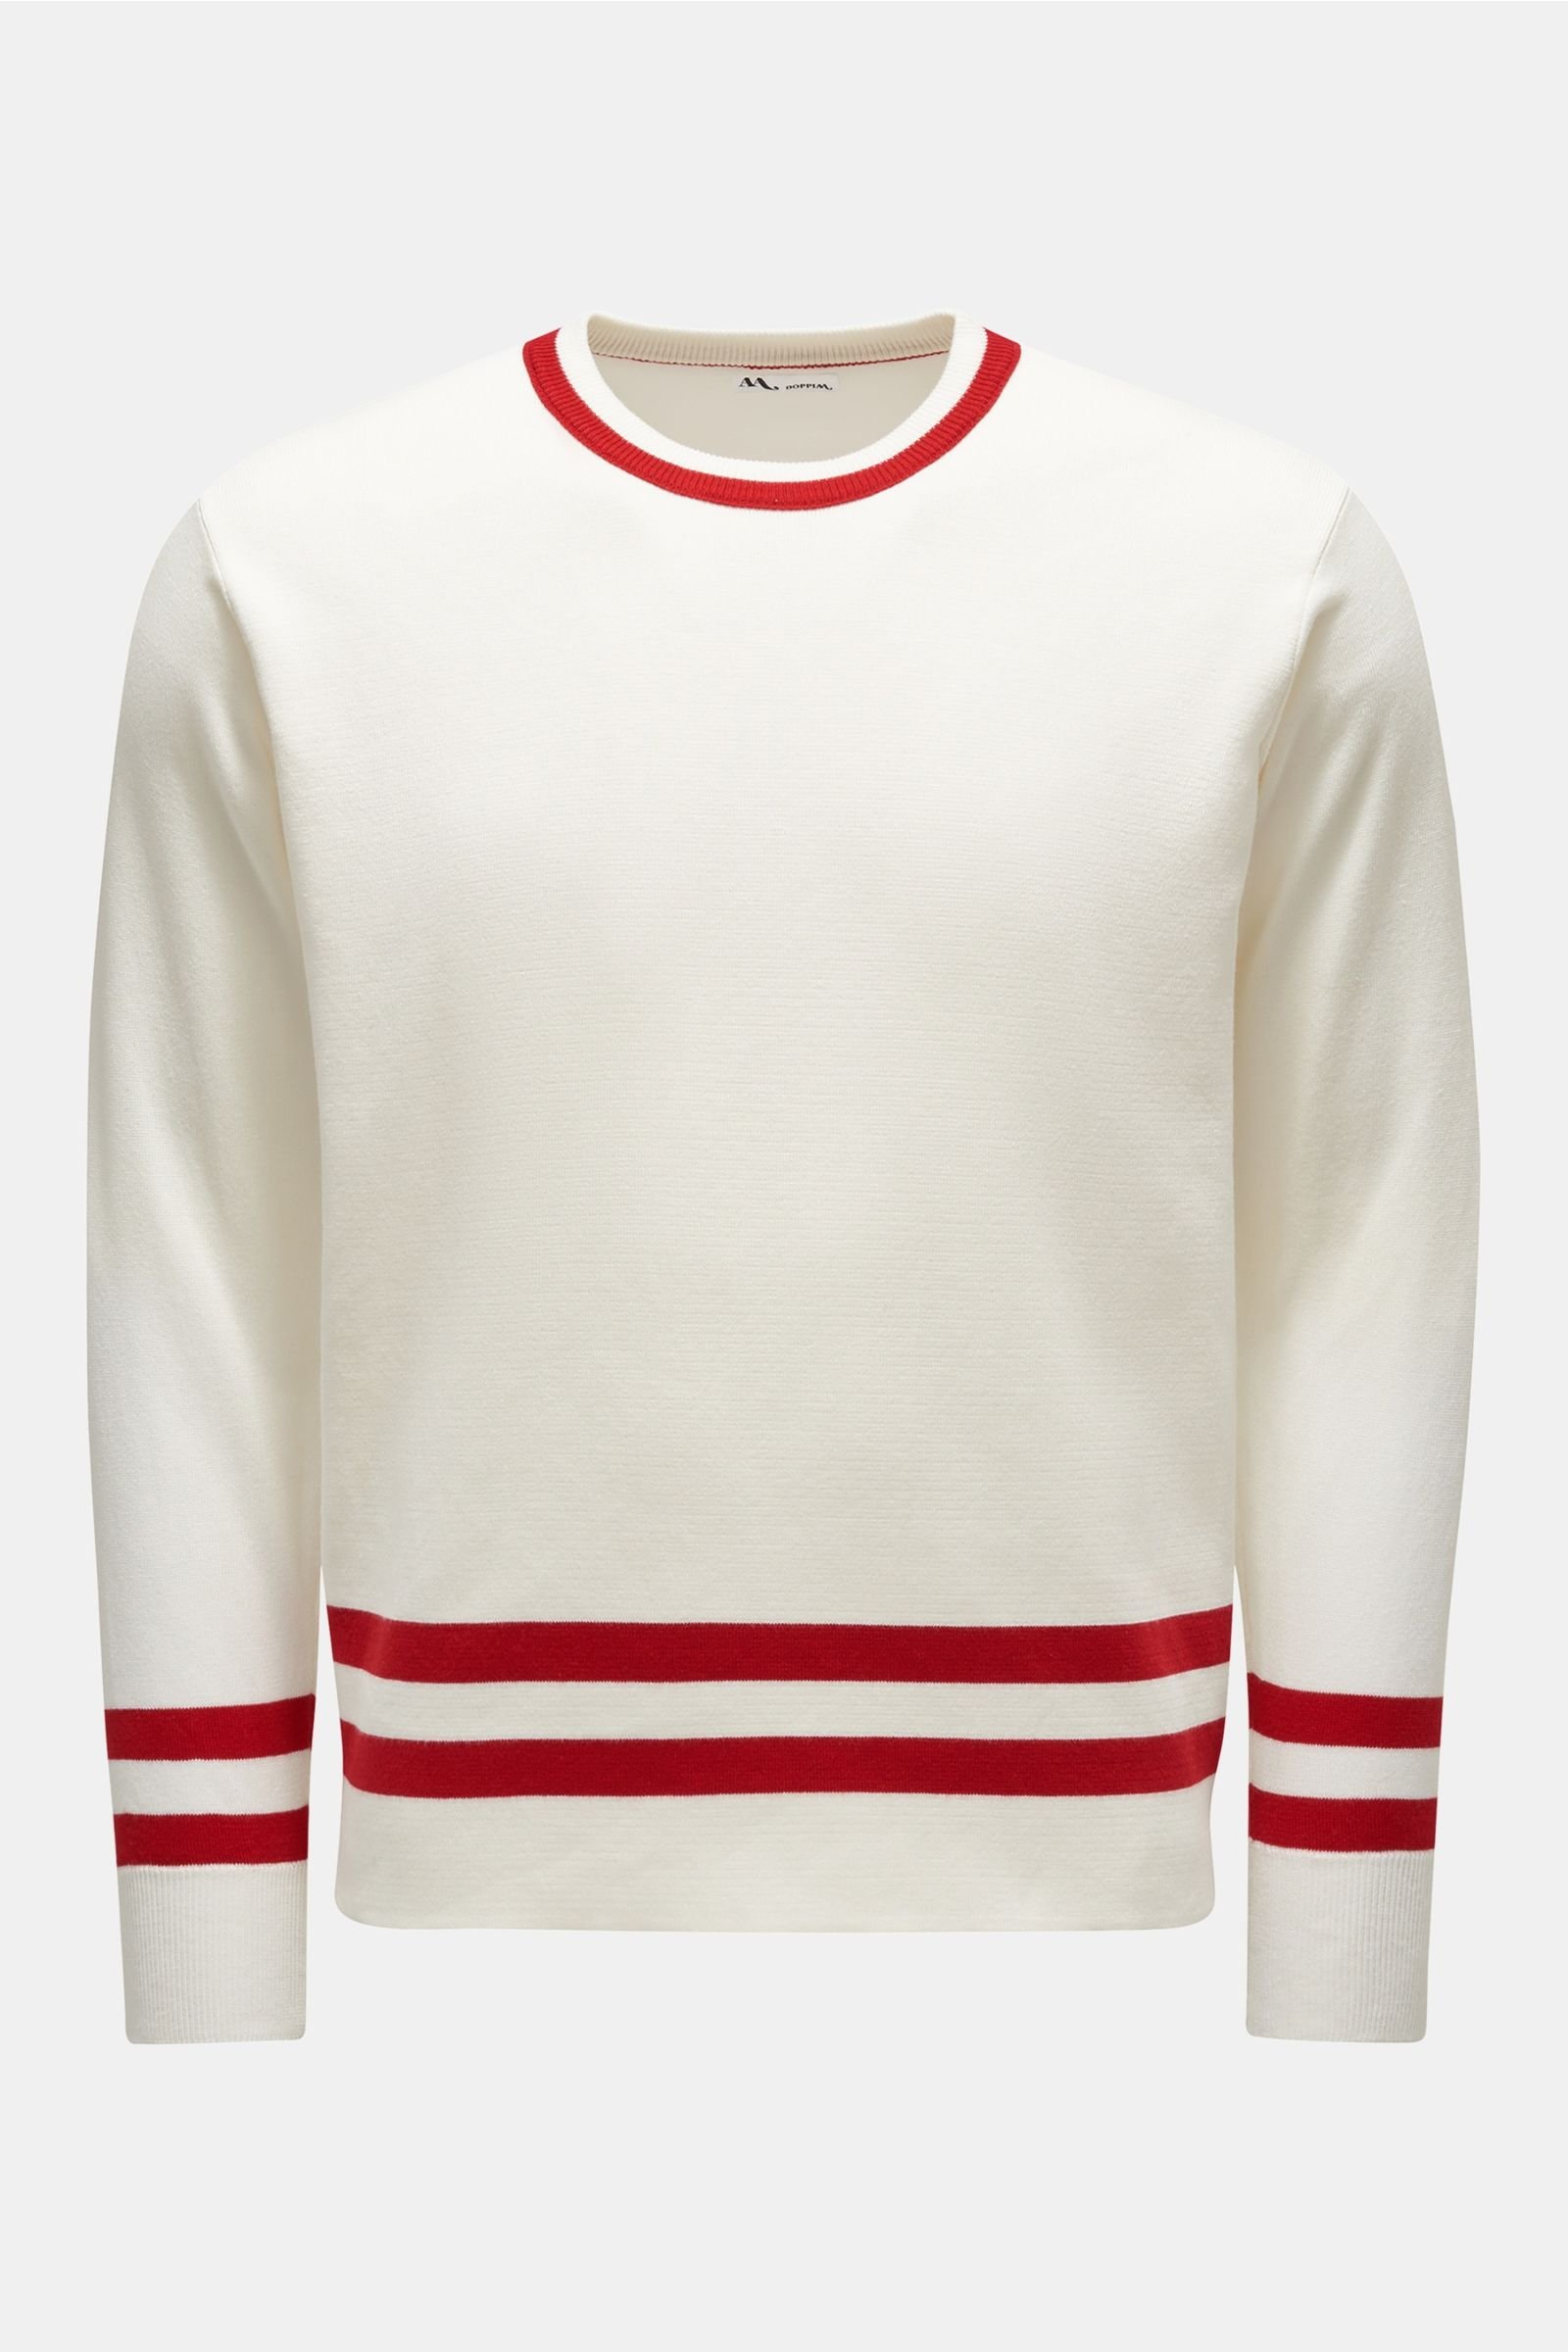 R-Neck Pullover 'Aandronico' rot/offwhite